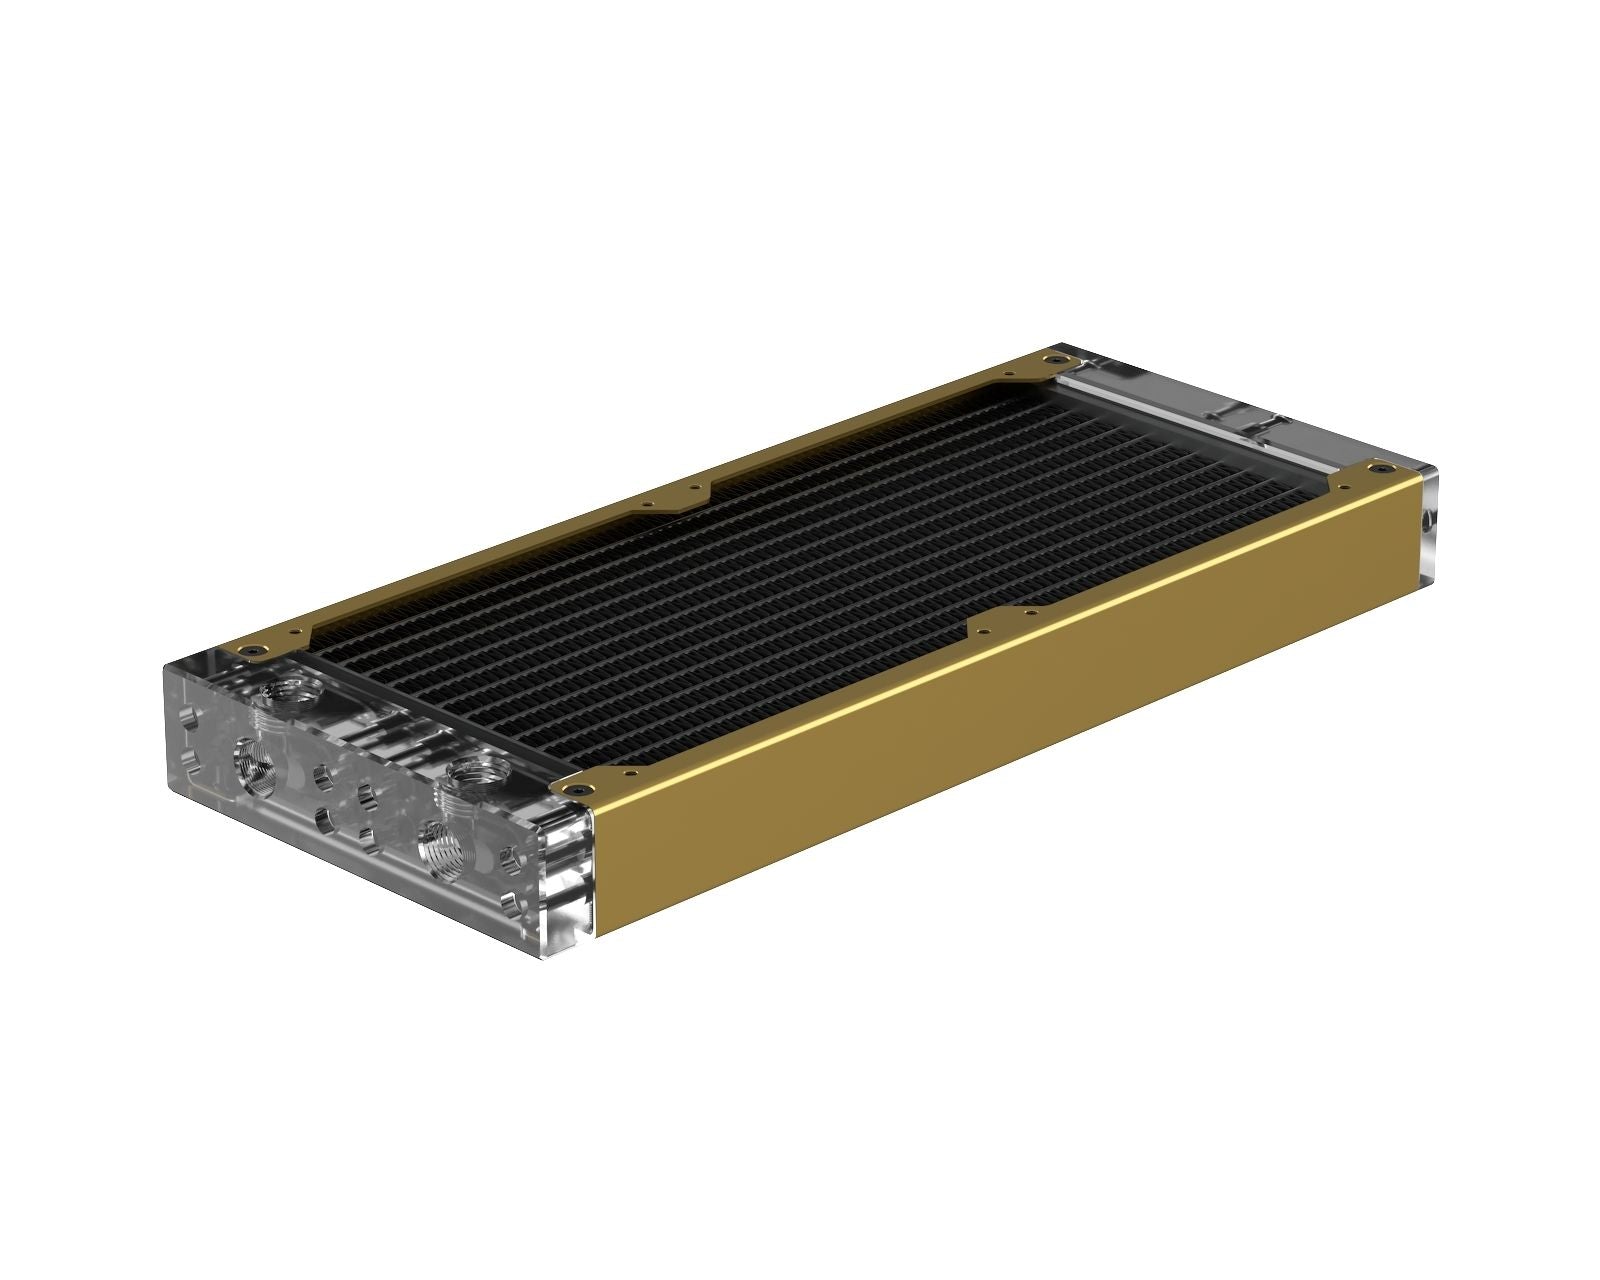 PrimoChill 240SL (30mm) EXIMO Modular Radiator, Clear Acrylic, 2x120mm, Dual Fan (R-SL-A24) Available in 20+ Colors, Assembled in USA and Custom Watercooling Loop Ready - Candy Gold